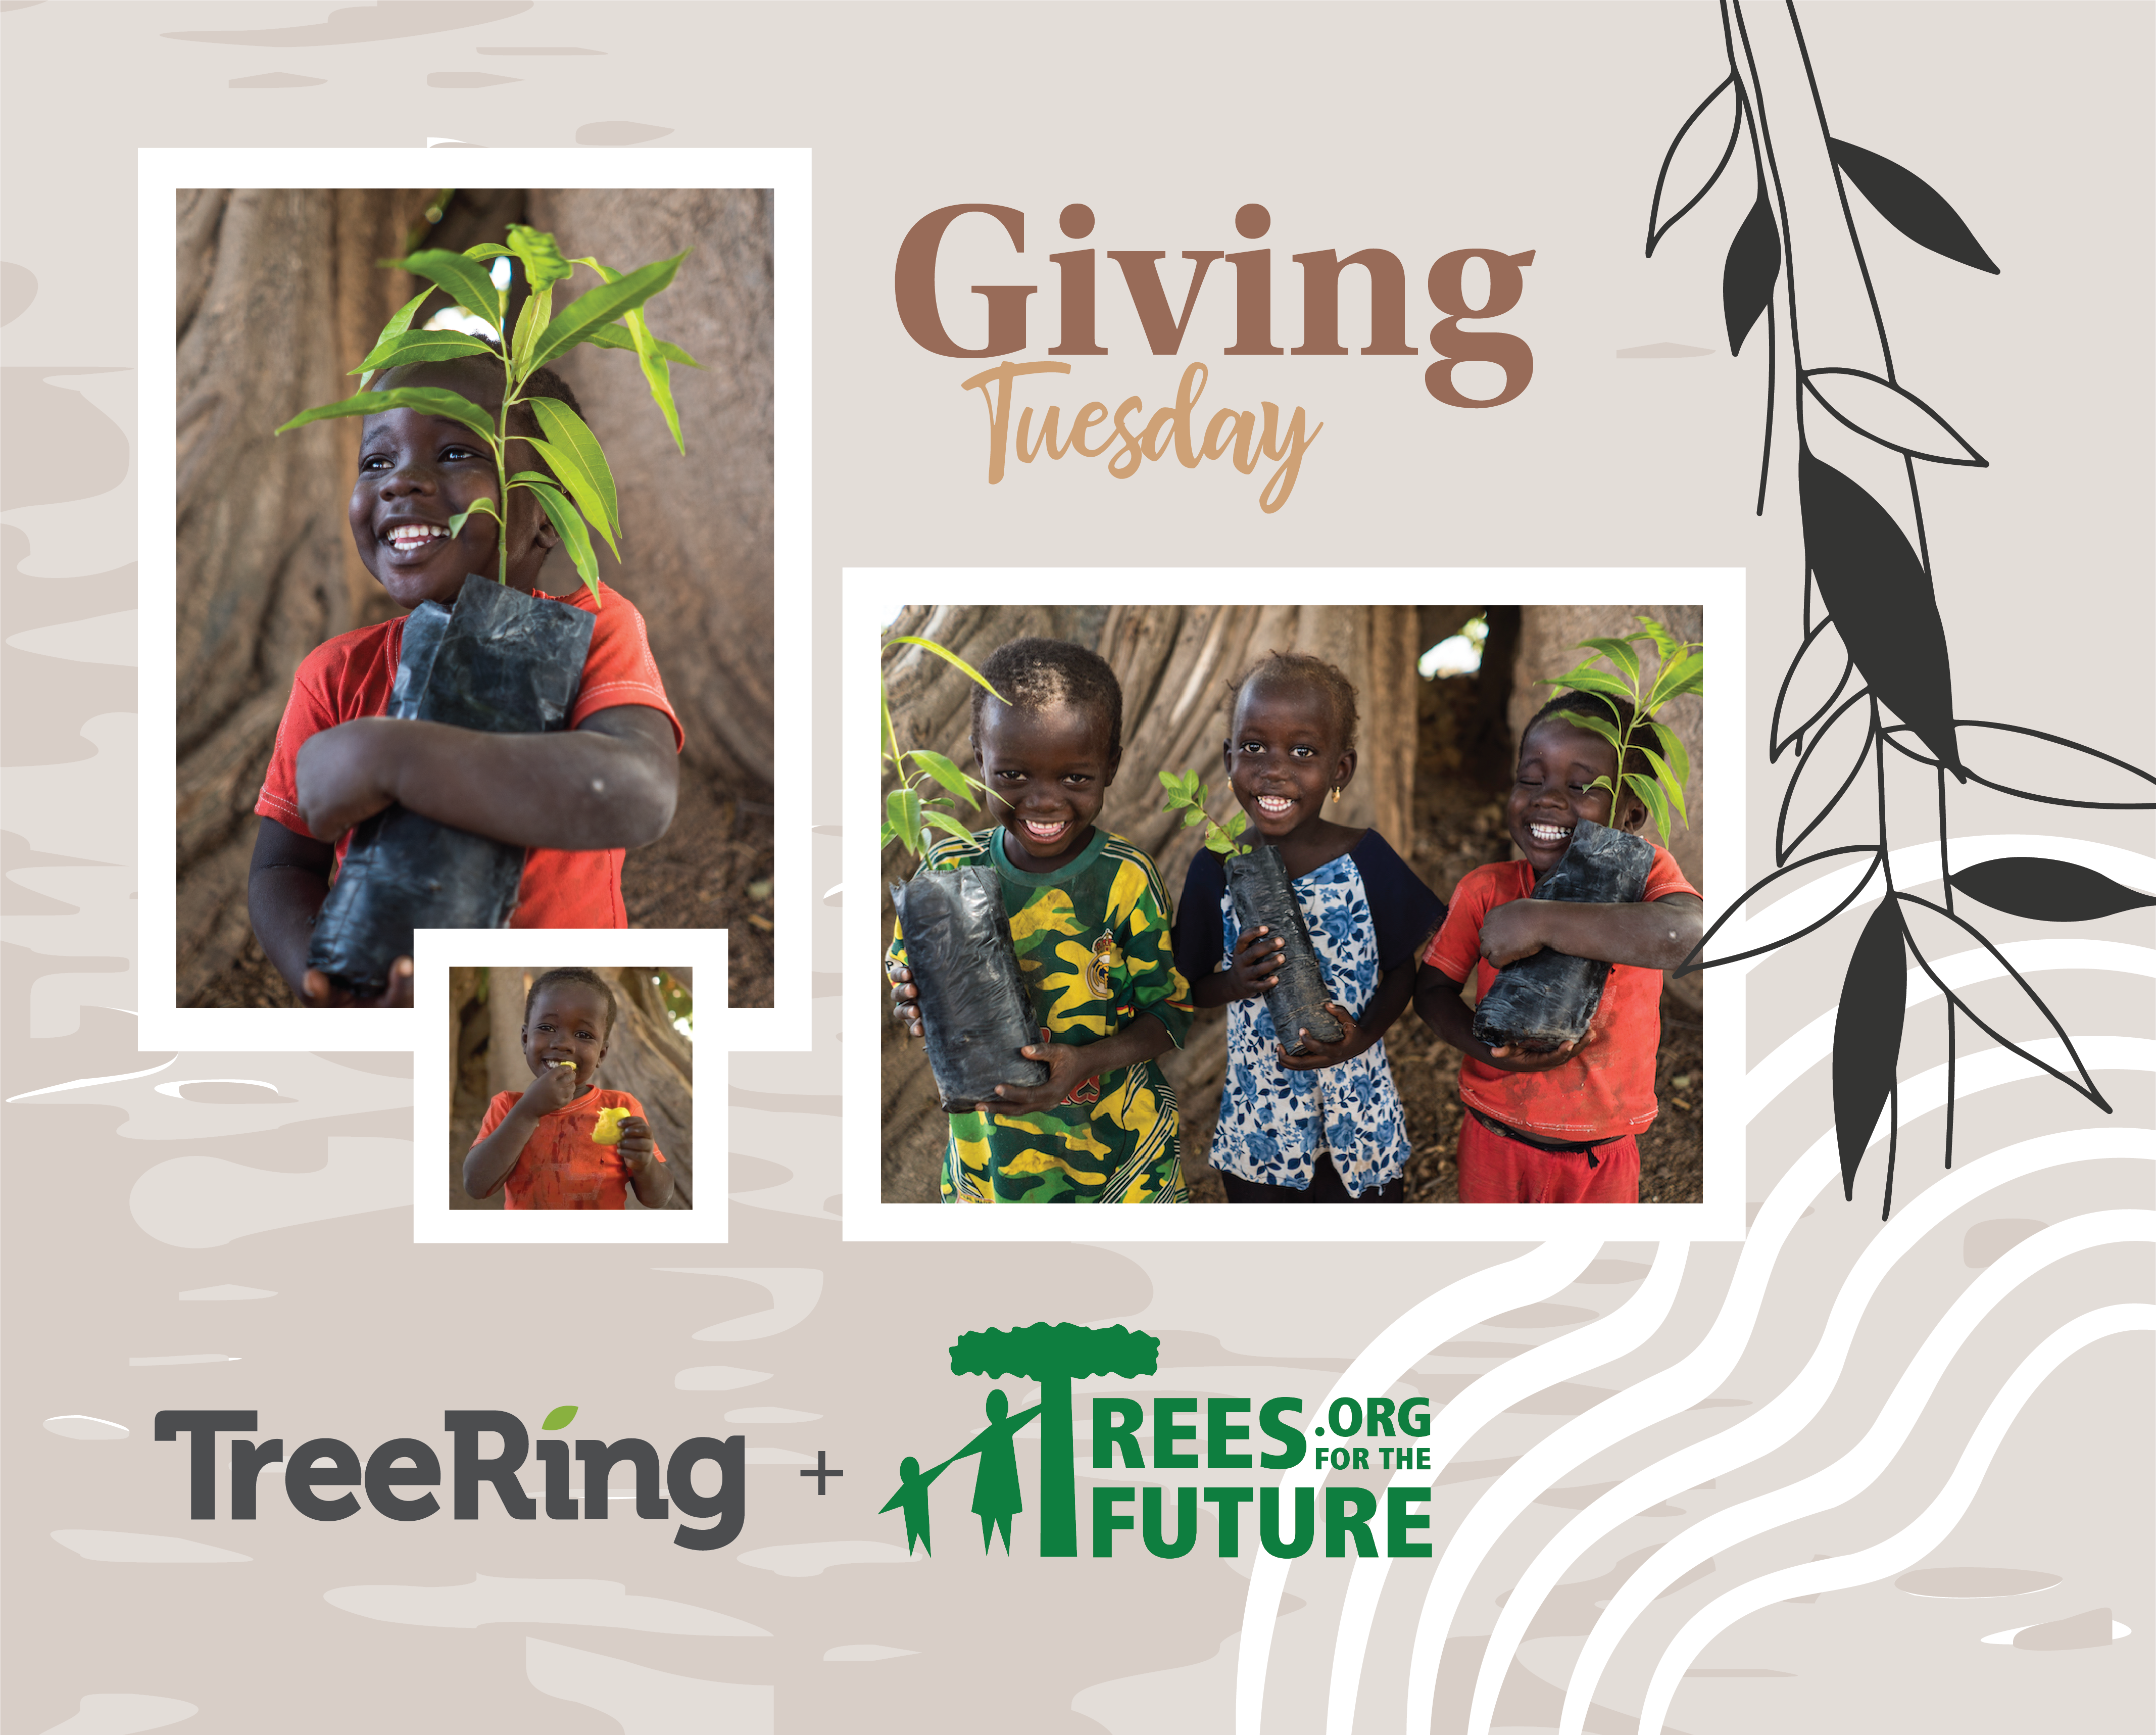 TreeRing Yearbooks and Trees for the Future celebrate $37,500 in donations